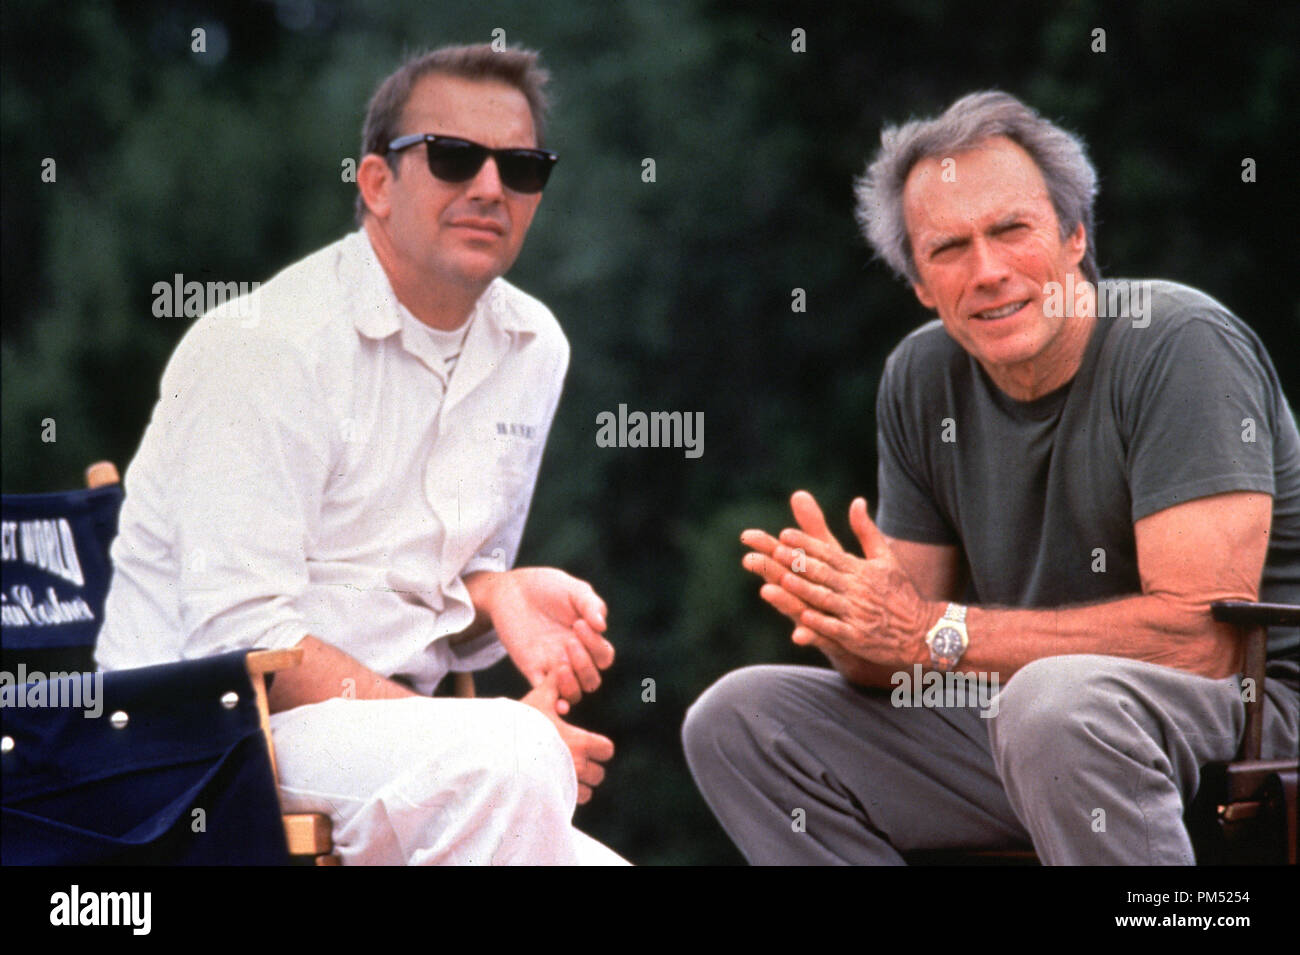 Film Still from 'A Perfect World' Kevin Costner, Dir. Clint Eastwood © 1993 Warner Brothers Stock Photo